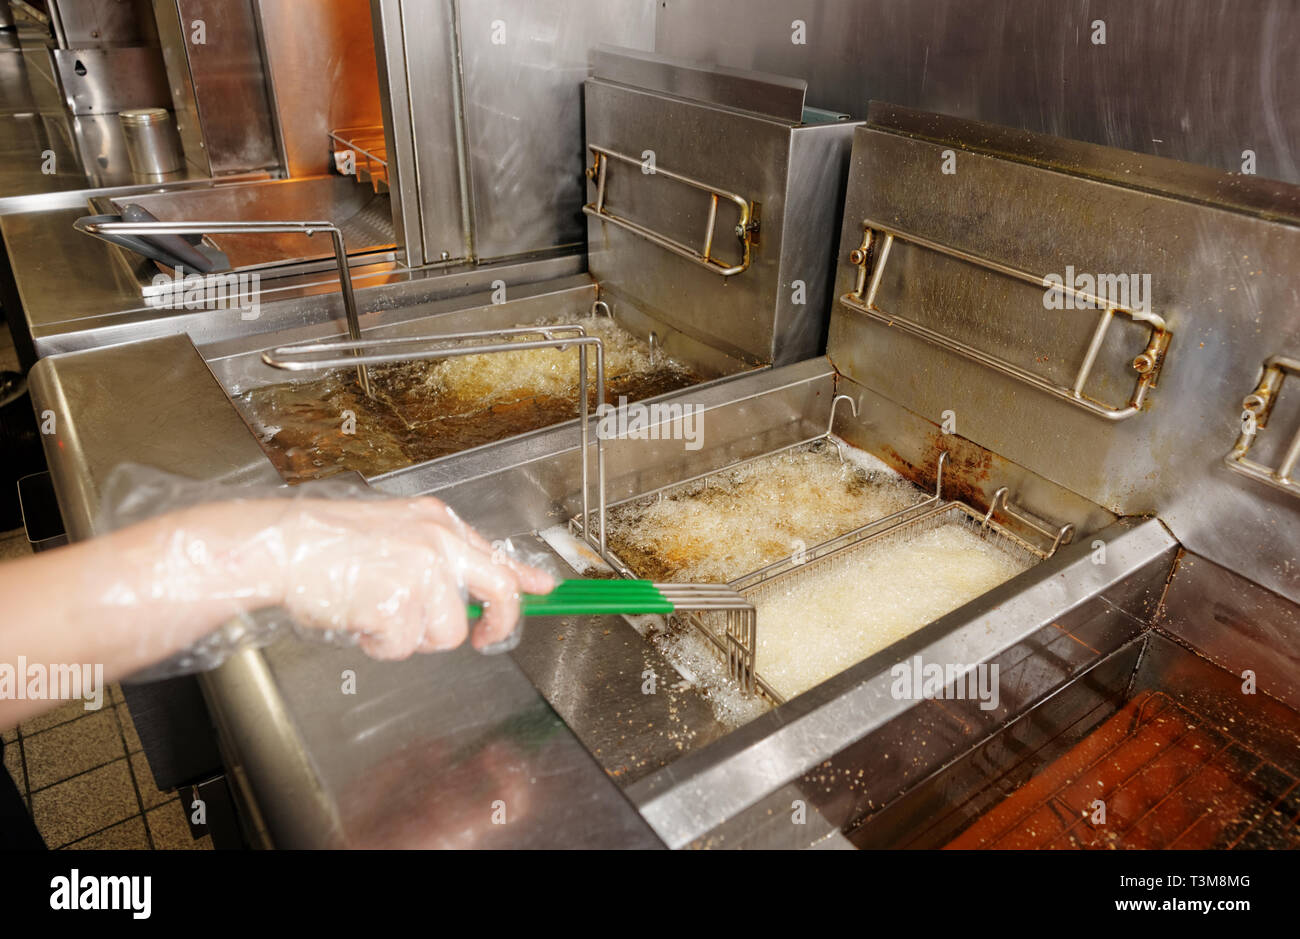 https://c8.alamy.com/comp/T3M8MG/deep-fryers-with-boiling-oil-on-fast-food-kitchen-T3M8MG.jpg